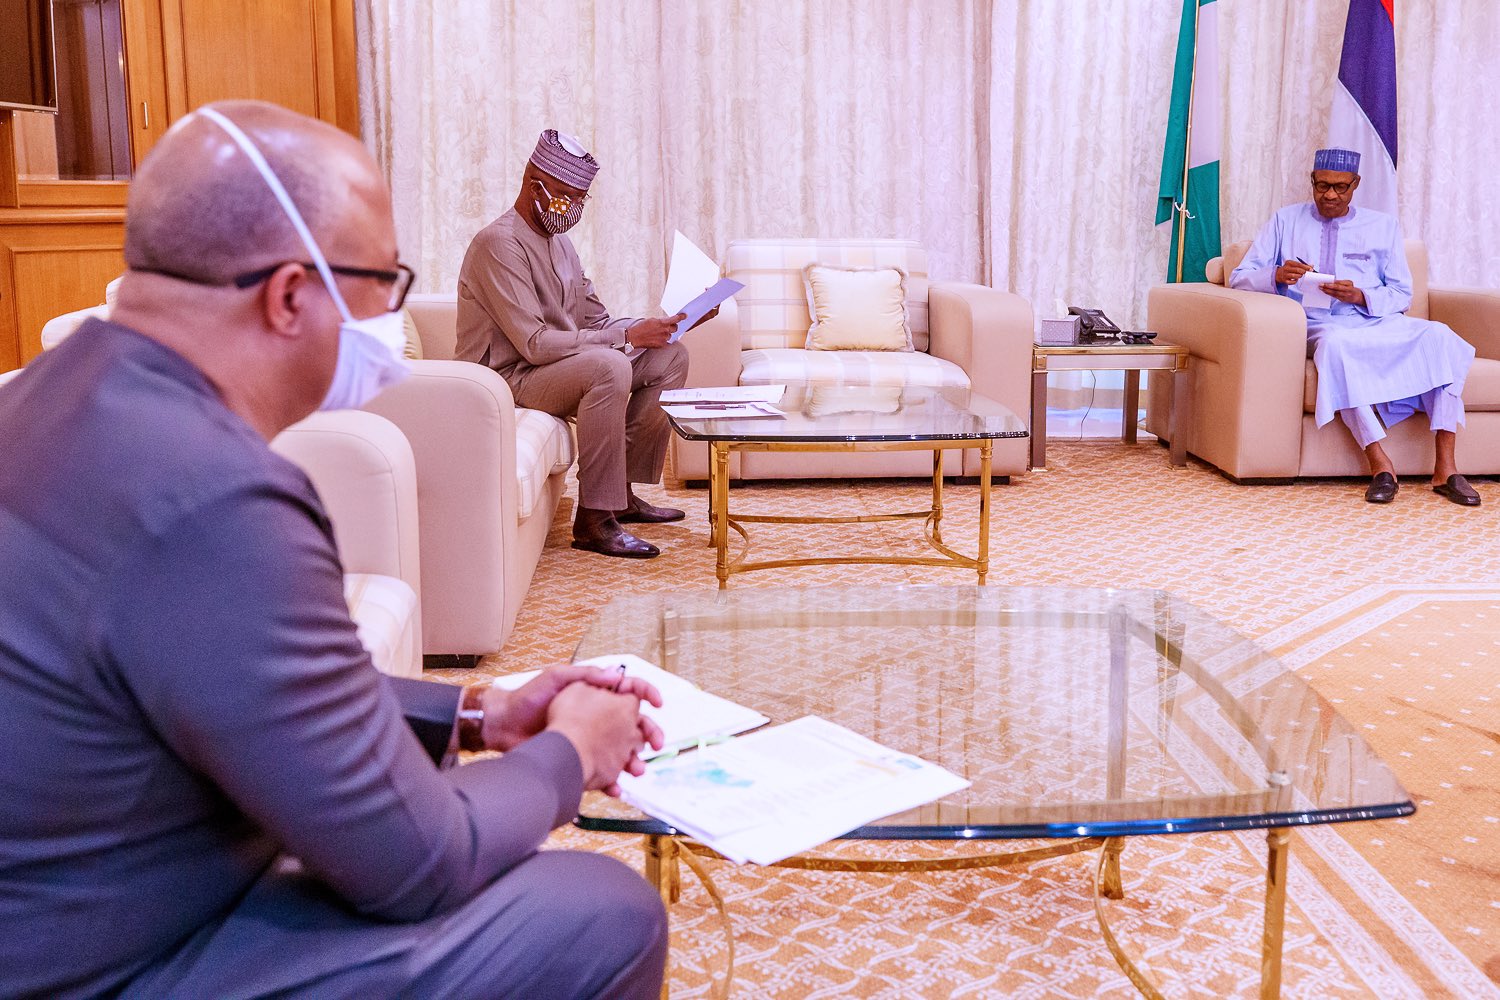 President Muhammadu Buhari receiving briefings from the Presidential Task Force on COVID-19 led by SGF, Mr Boss Mustapha, Minister of Health, Dr Osagie Ehanire, and Director-General, Nigeria Centre for Disease Control (NCDC), Chikwe Ihekweazu. [Twitter/@BashirAhmaad]